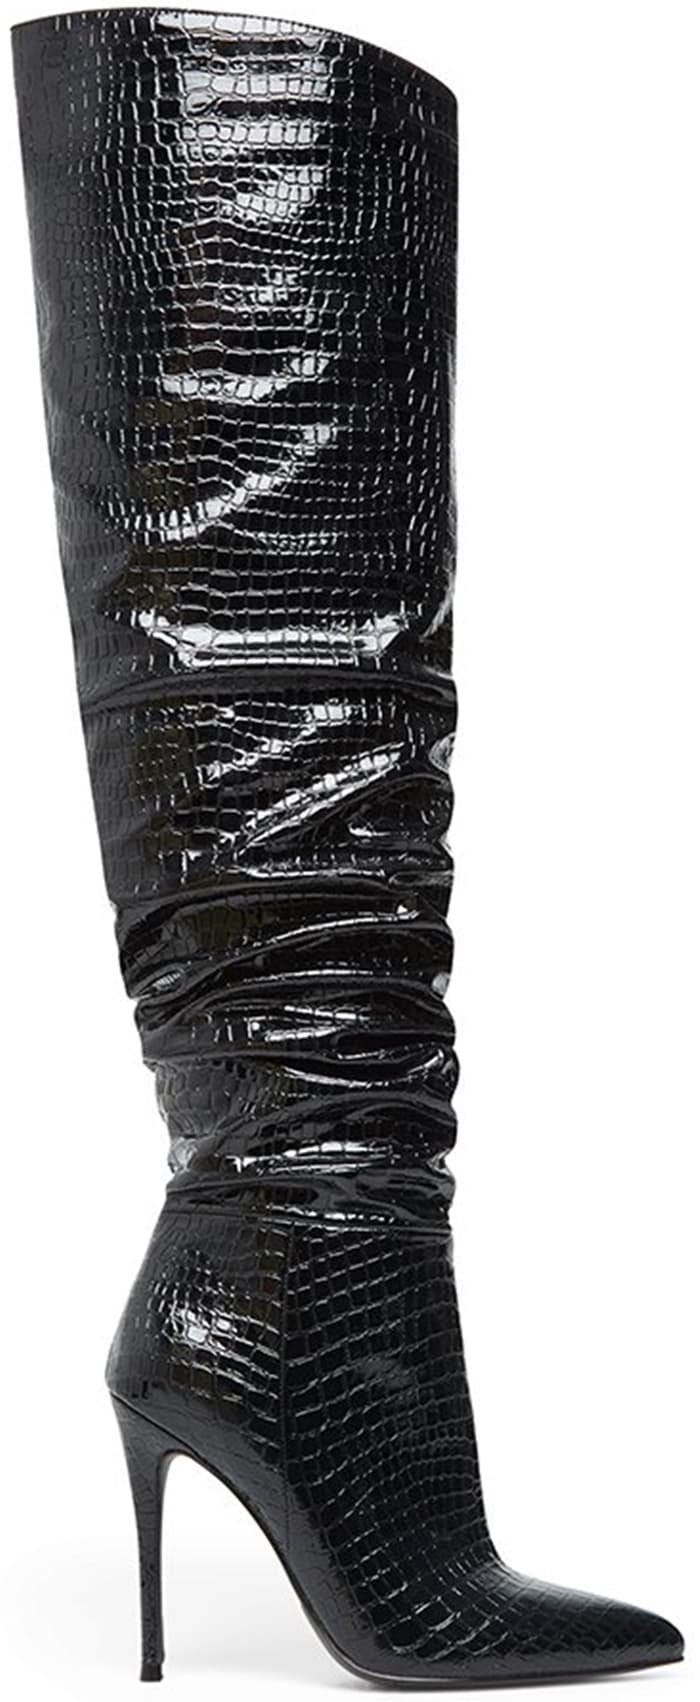 Reptile Embossed Over-the-Knee Winnie Harlow x Steve Madden Boots